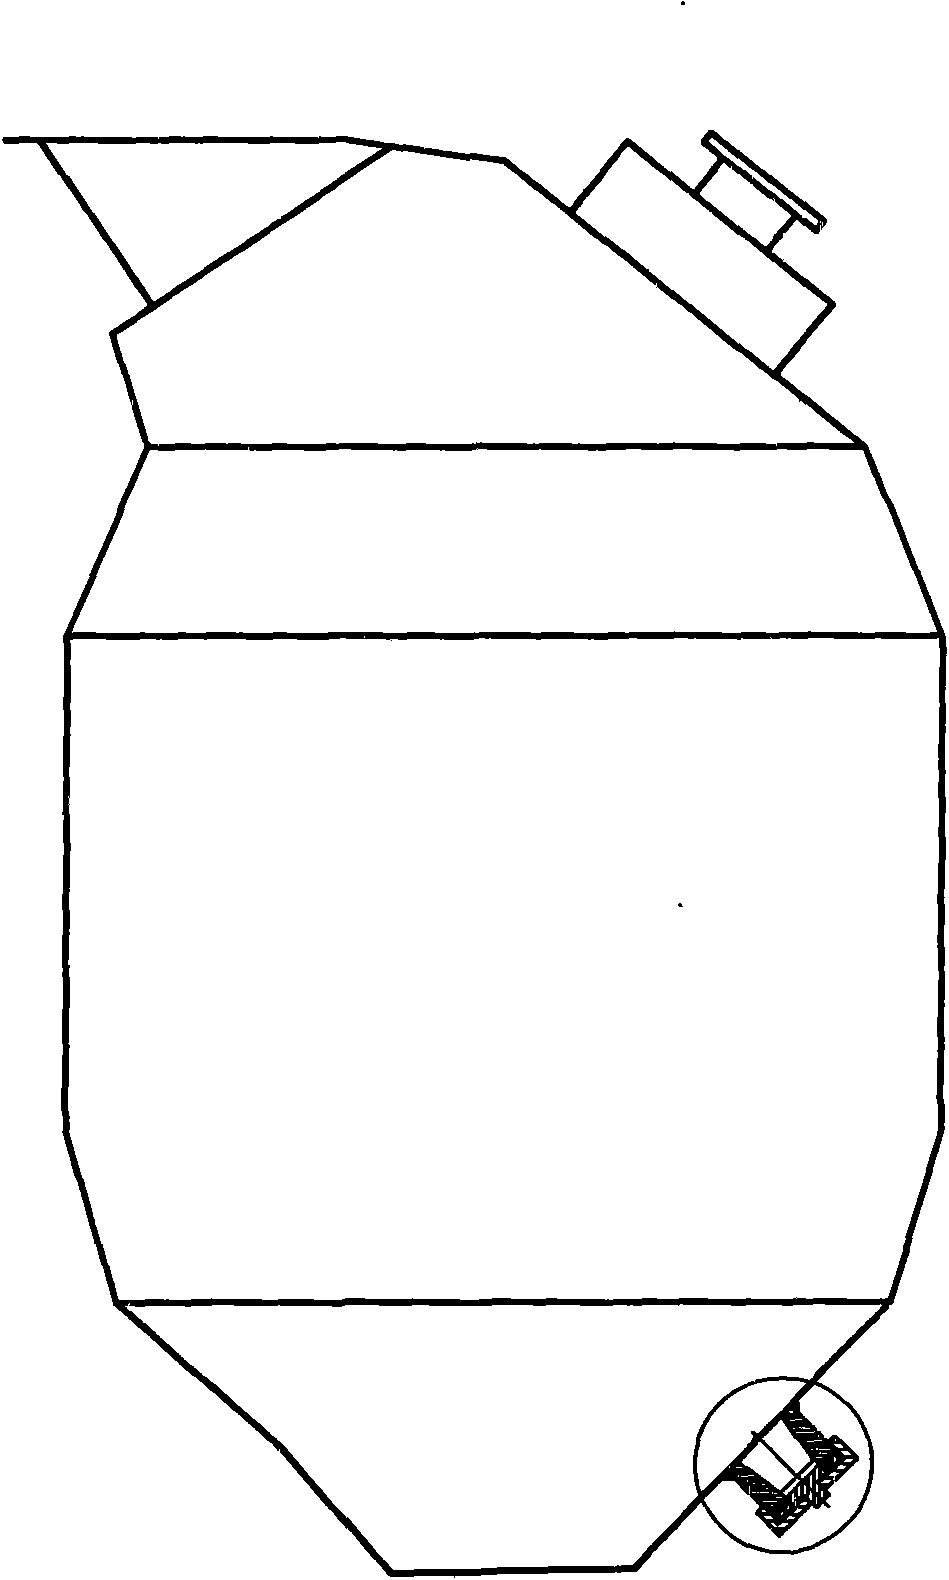 Structure for quickly eliminating putty at bottom of weighing material tank